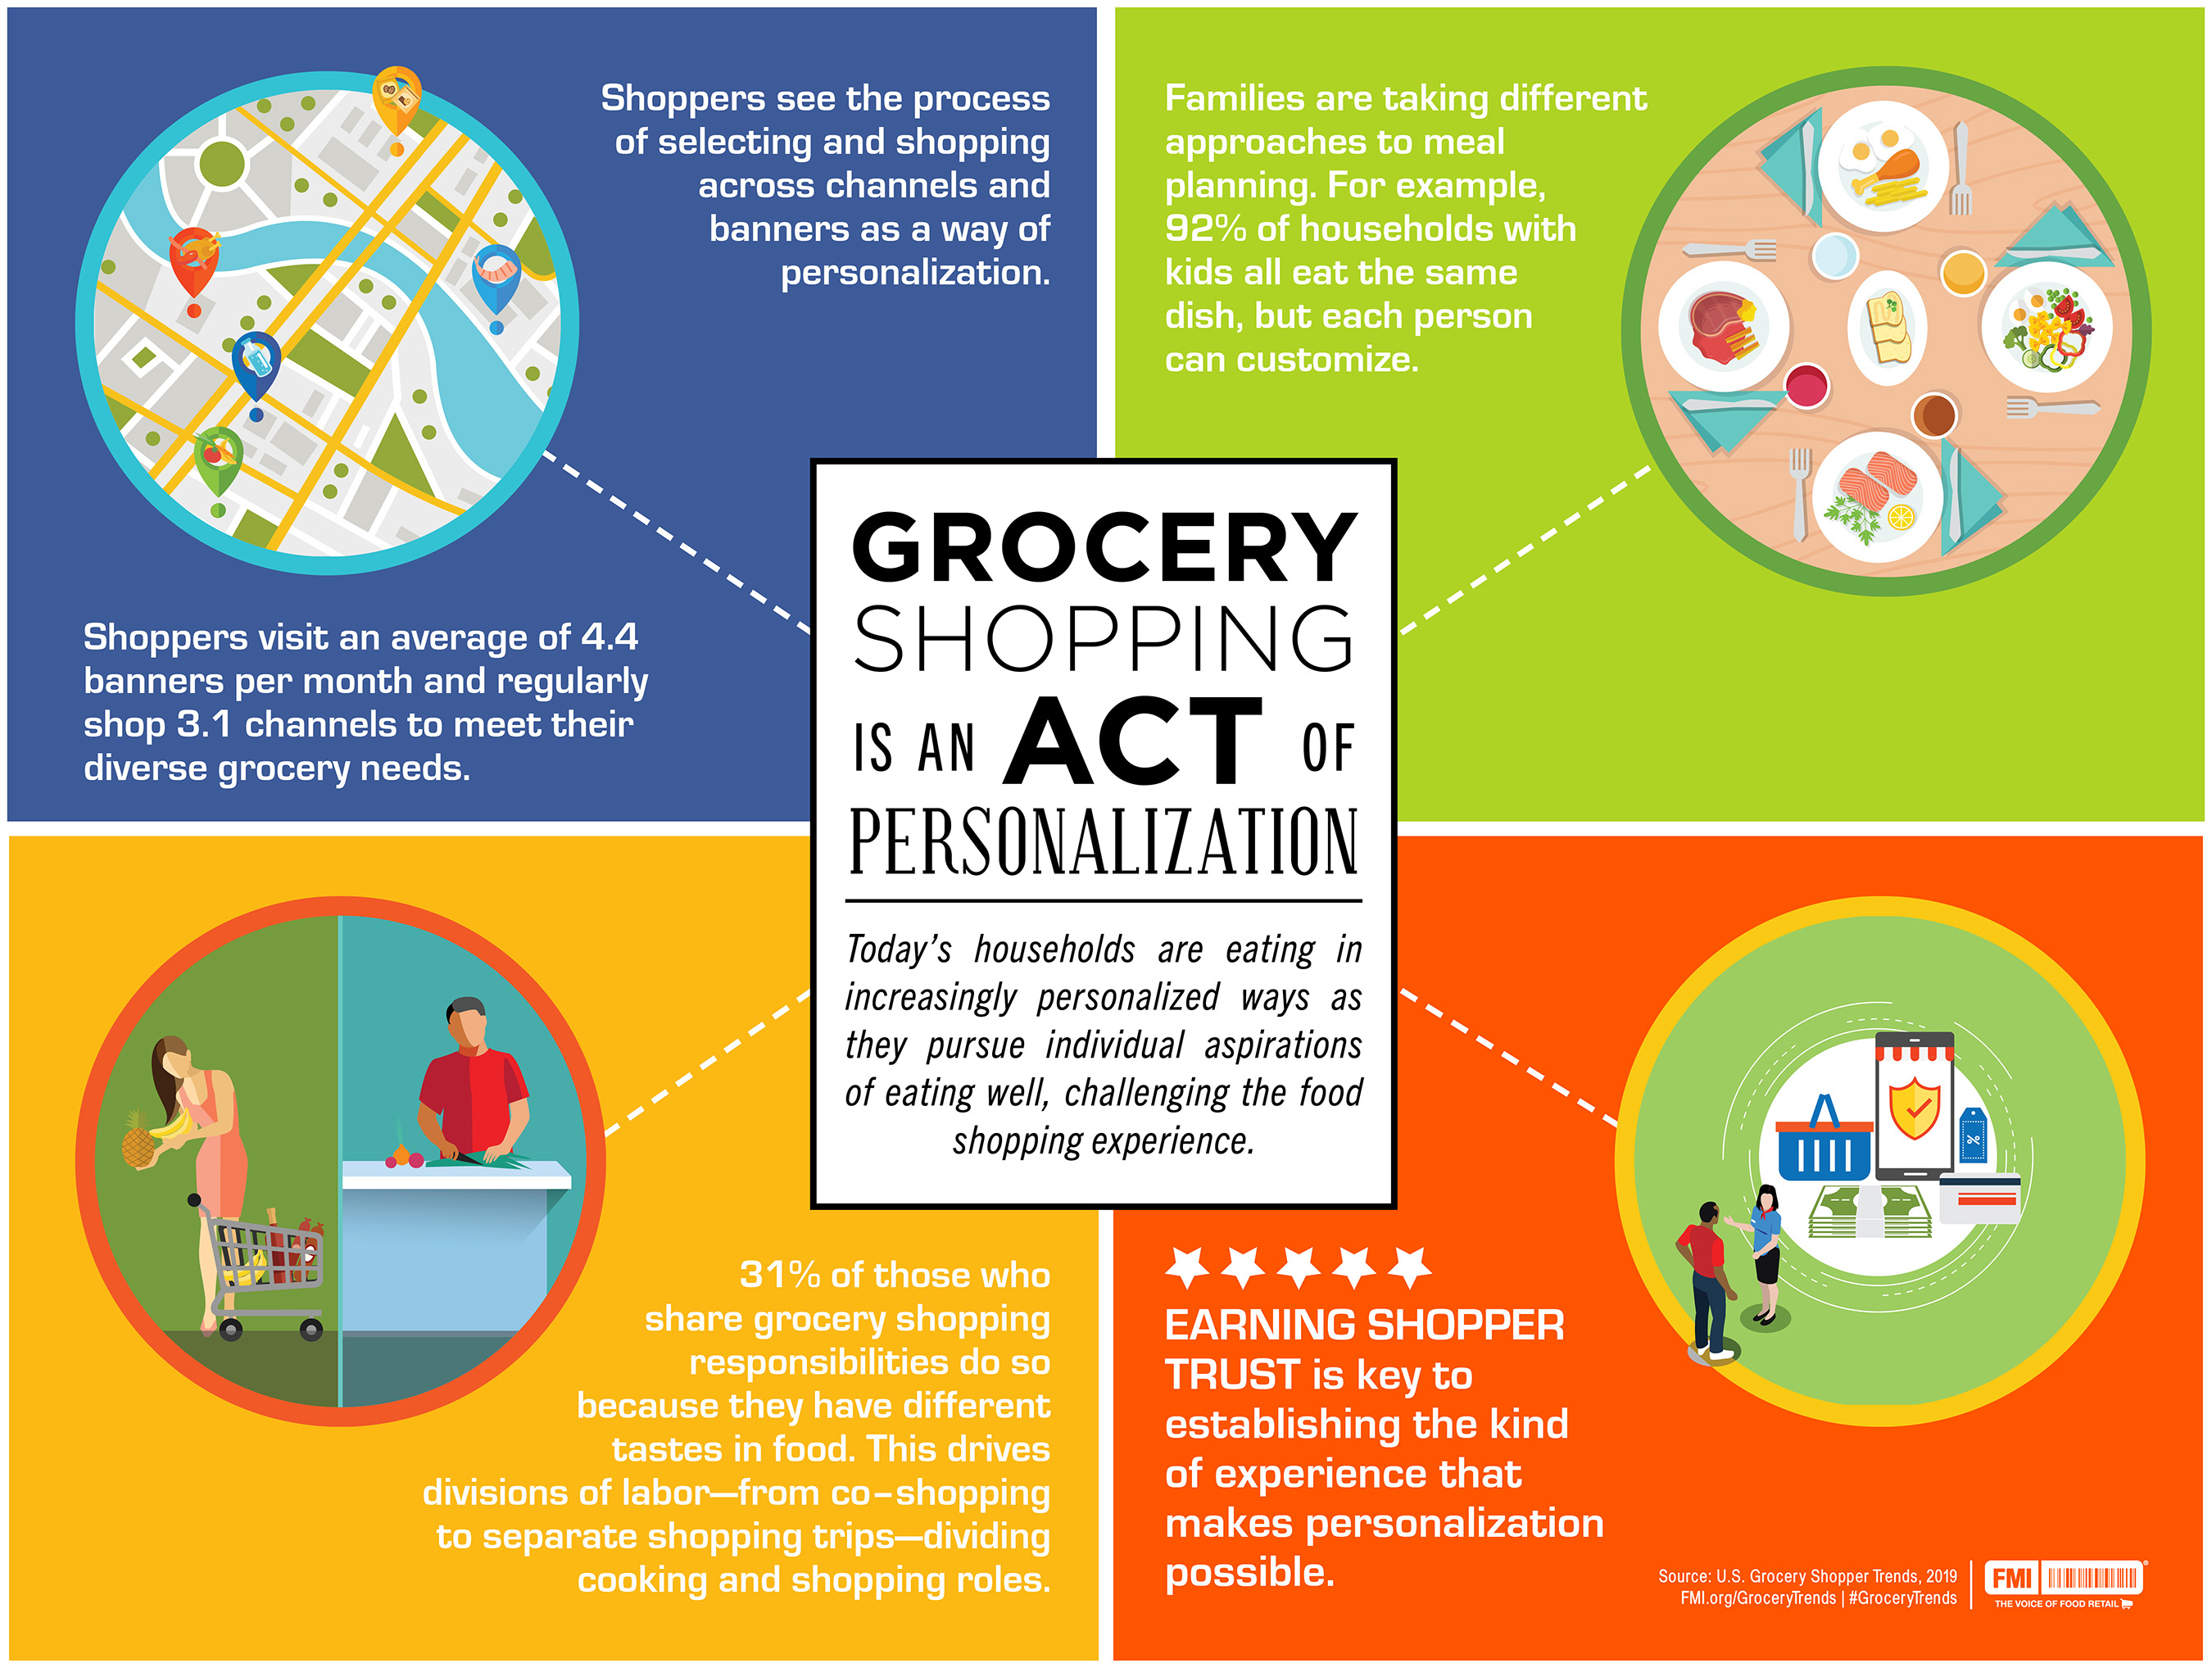 This infographic depicts how today’s households are eating in increasingly personalized ways as they pursue individual aspirations of eating well, challenging the food shopping experience.